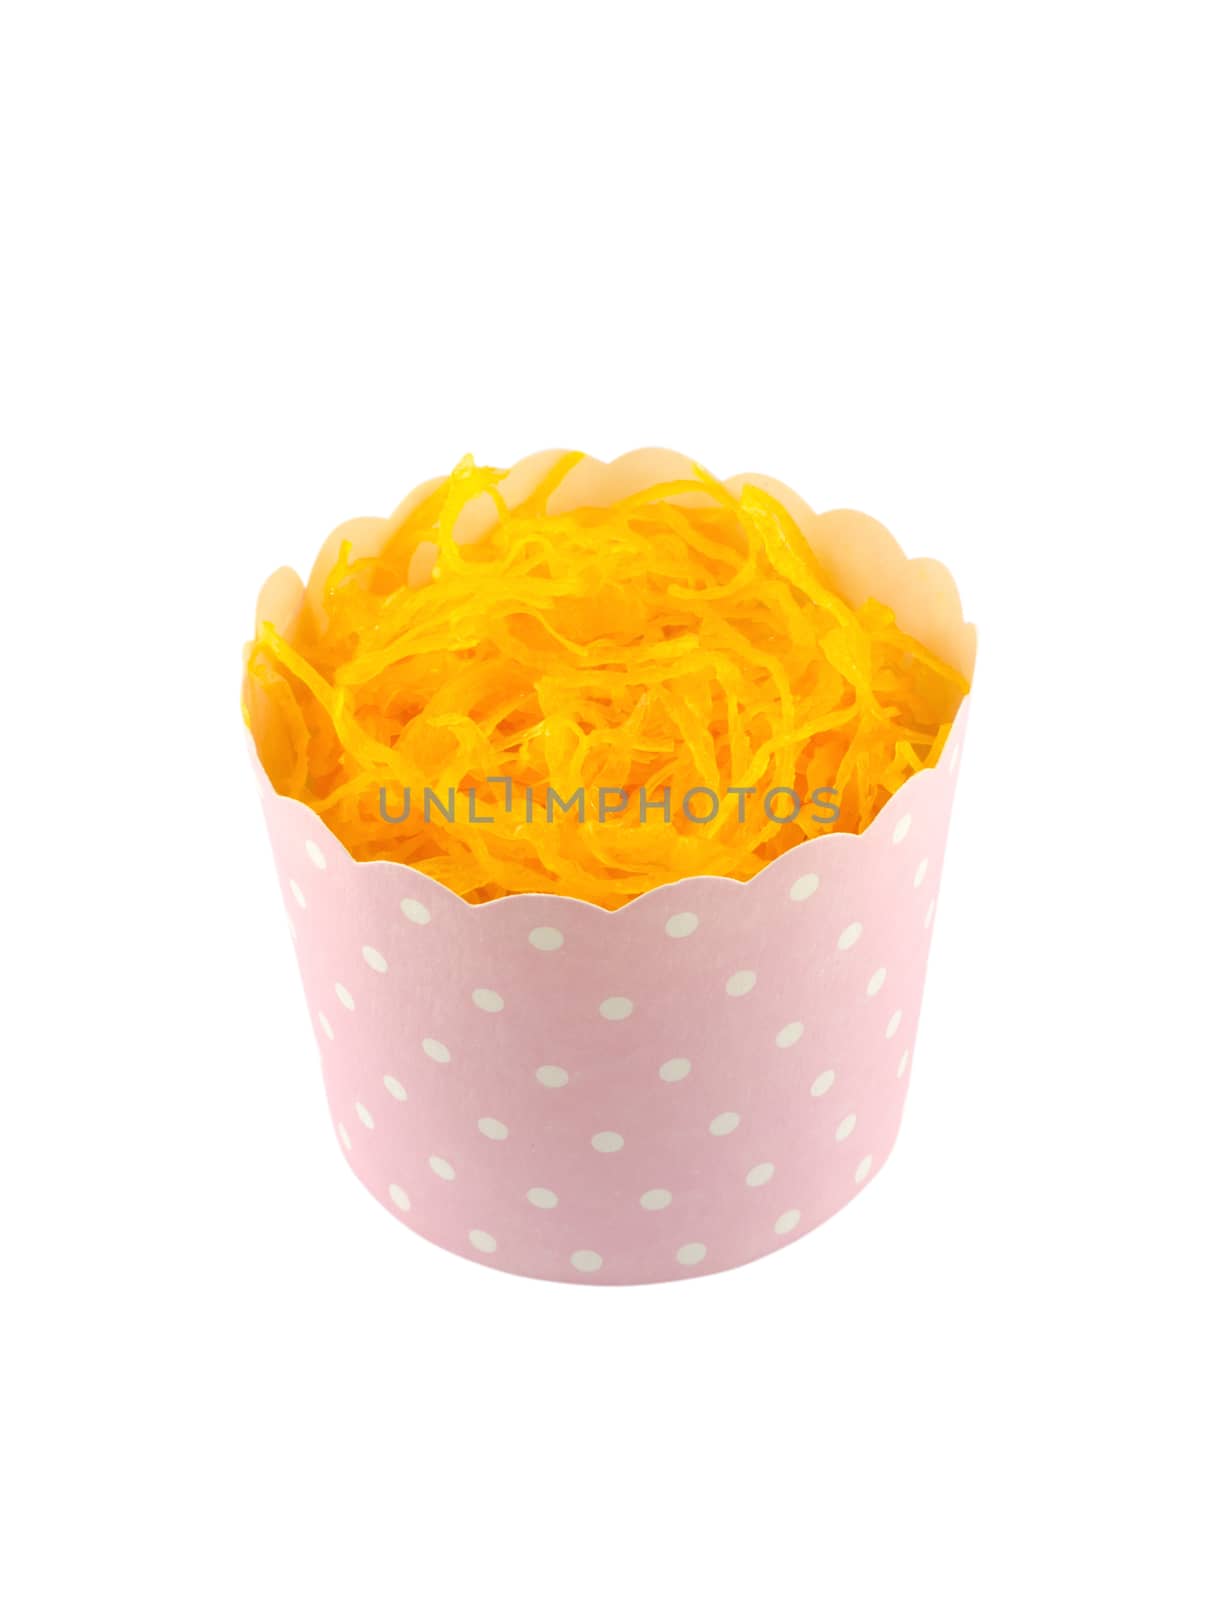 sweet yellow cupcake isolate on white background